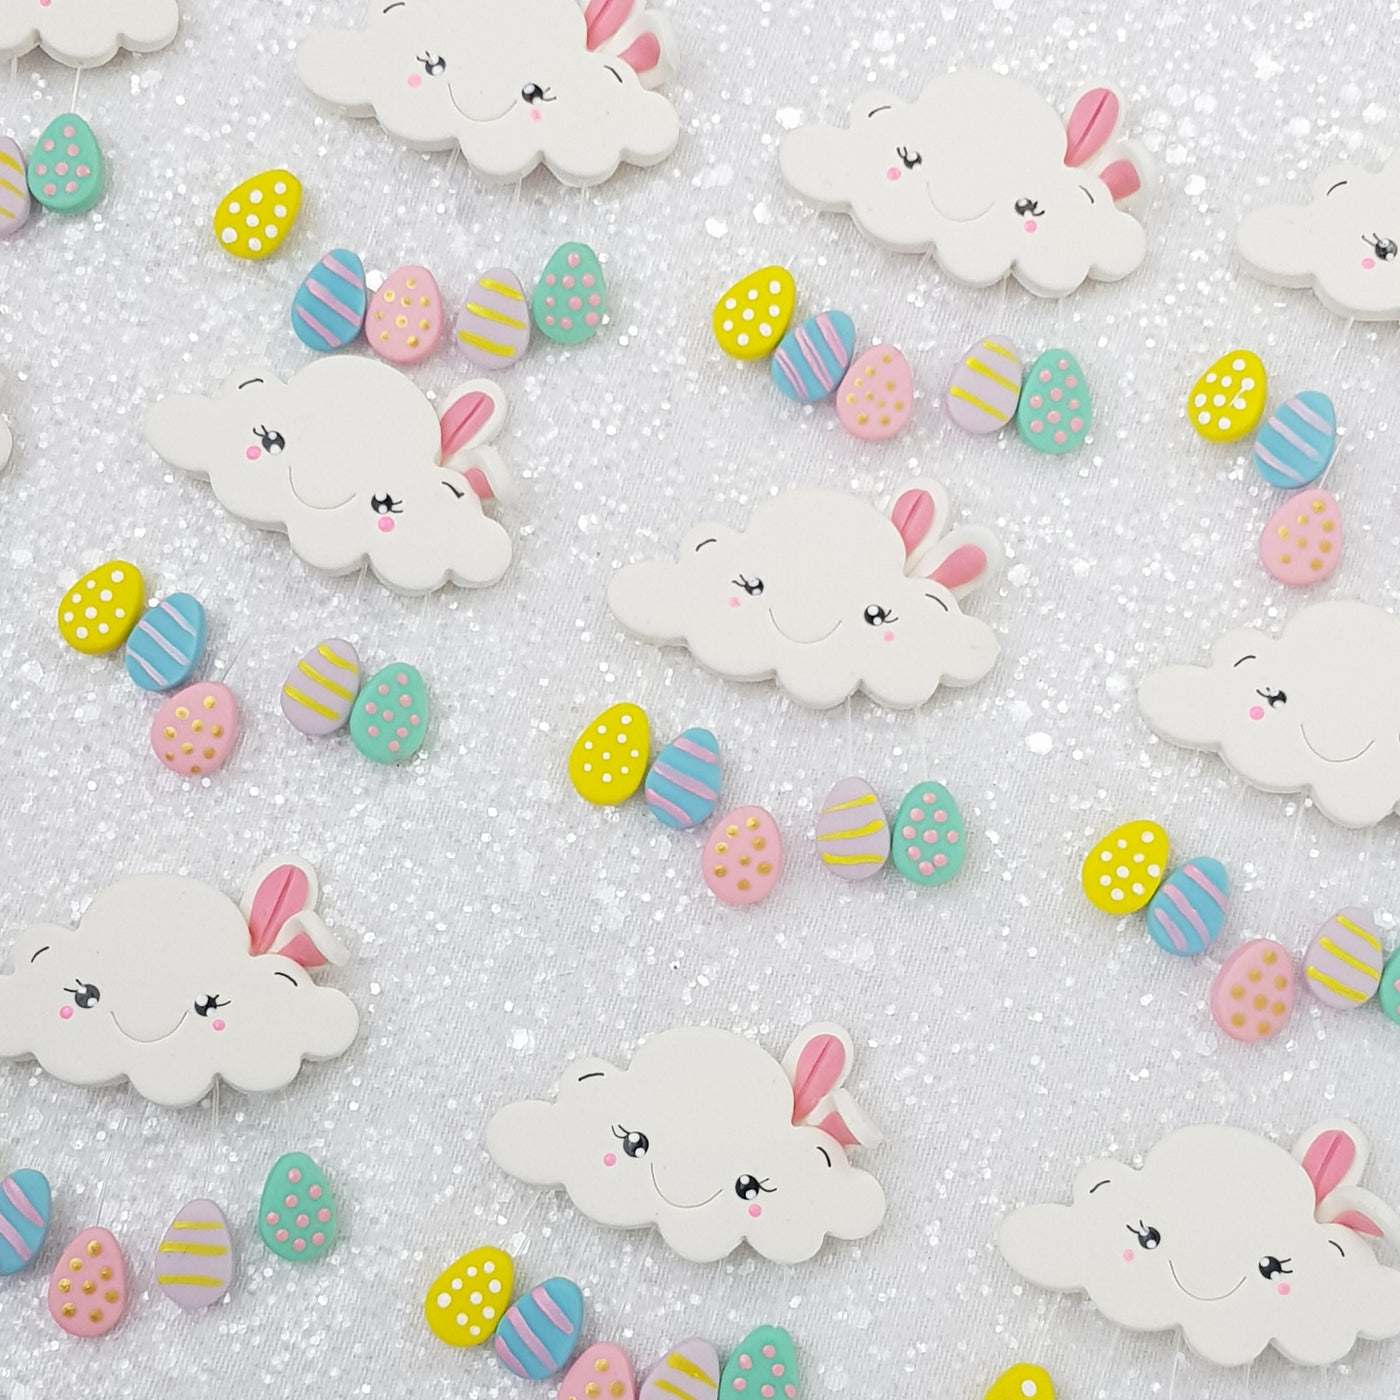 Cute Bunny Easter Clouds pastel - Handmade Flatback Clay Bow Centre - Crafty Mood